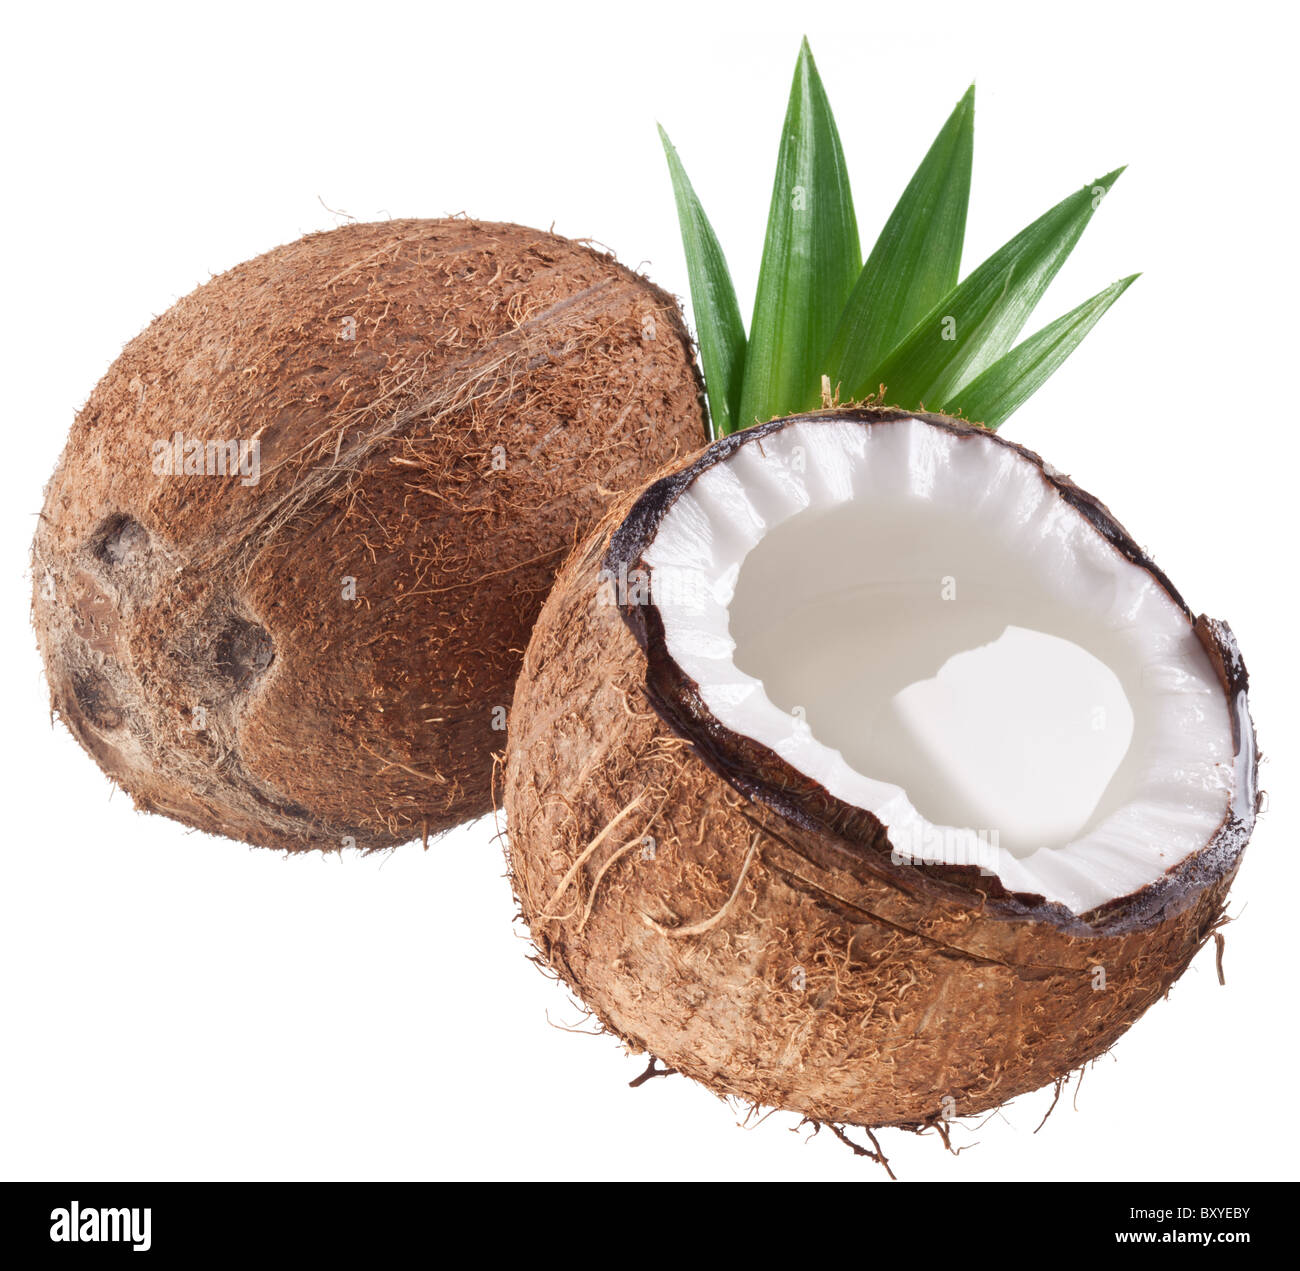 High-quality photos of coconuts on a white background. Stock Photo